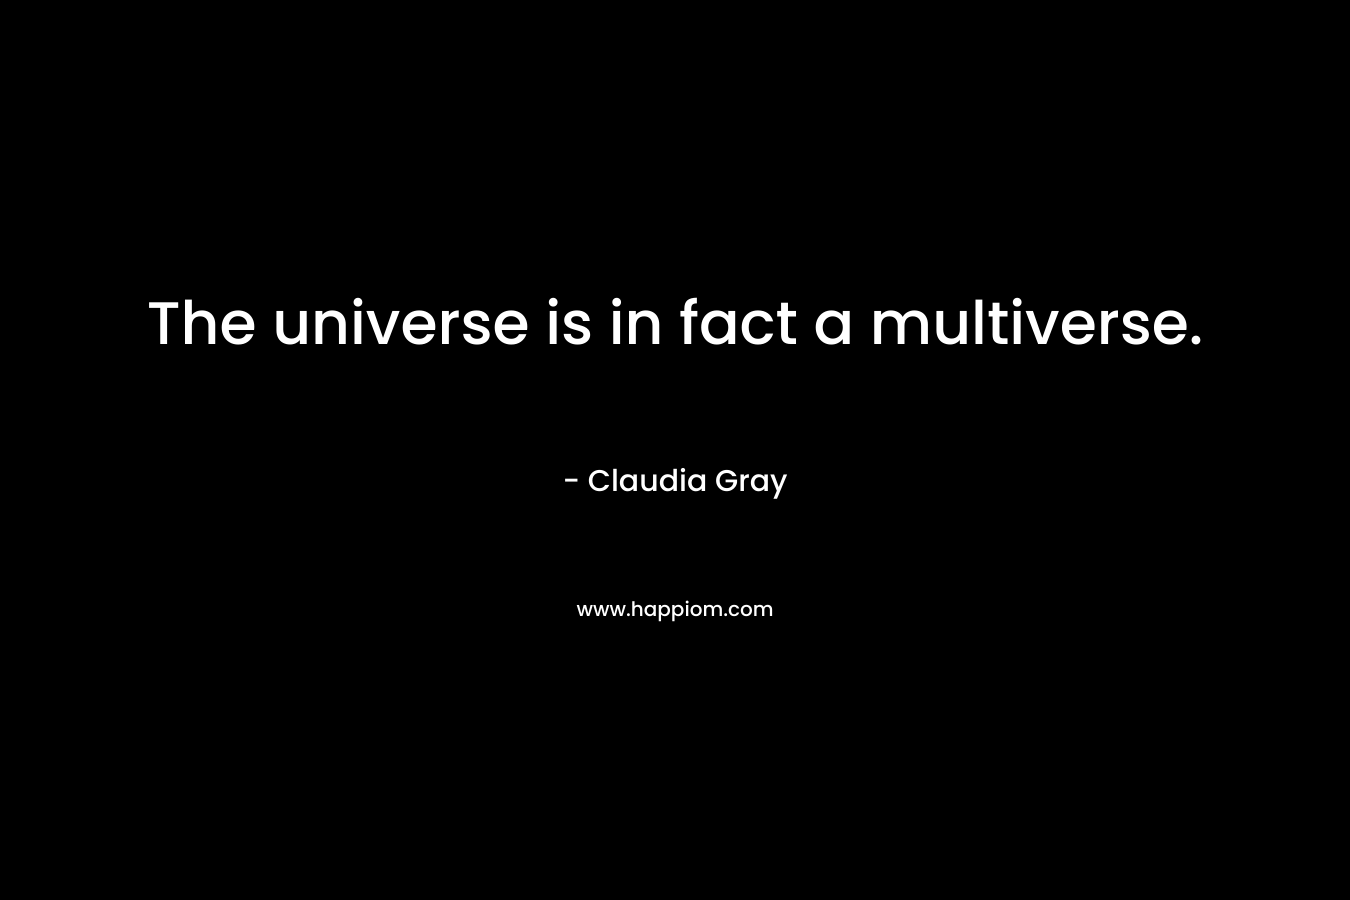 The universe is in fact a multiverse.